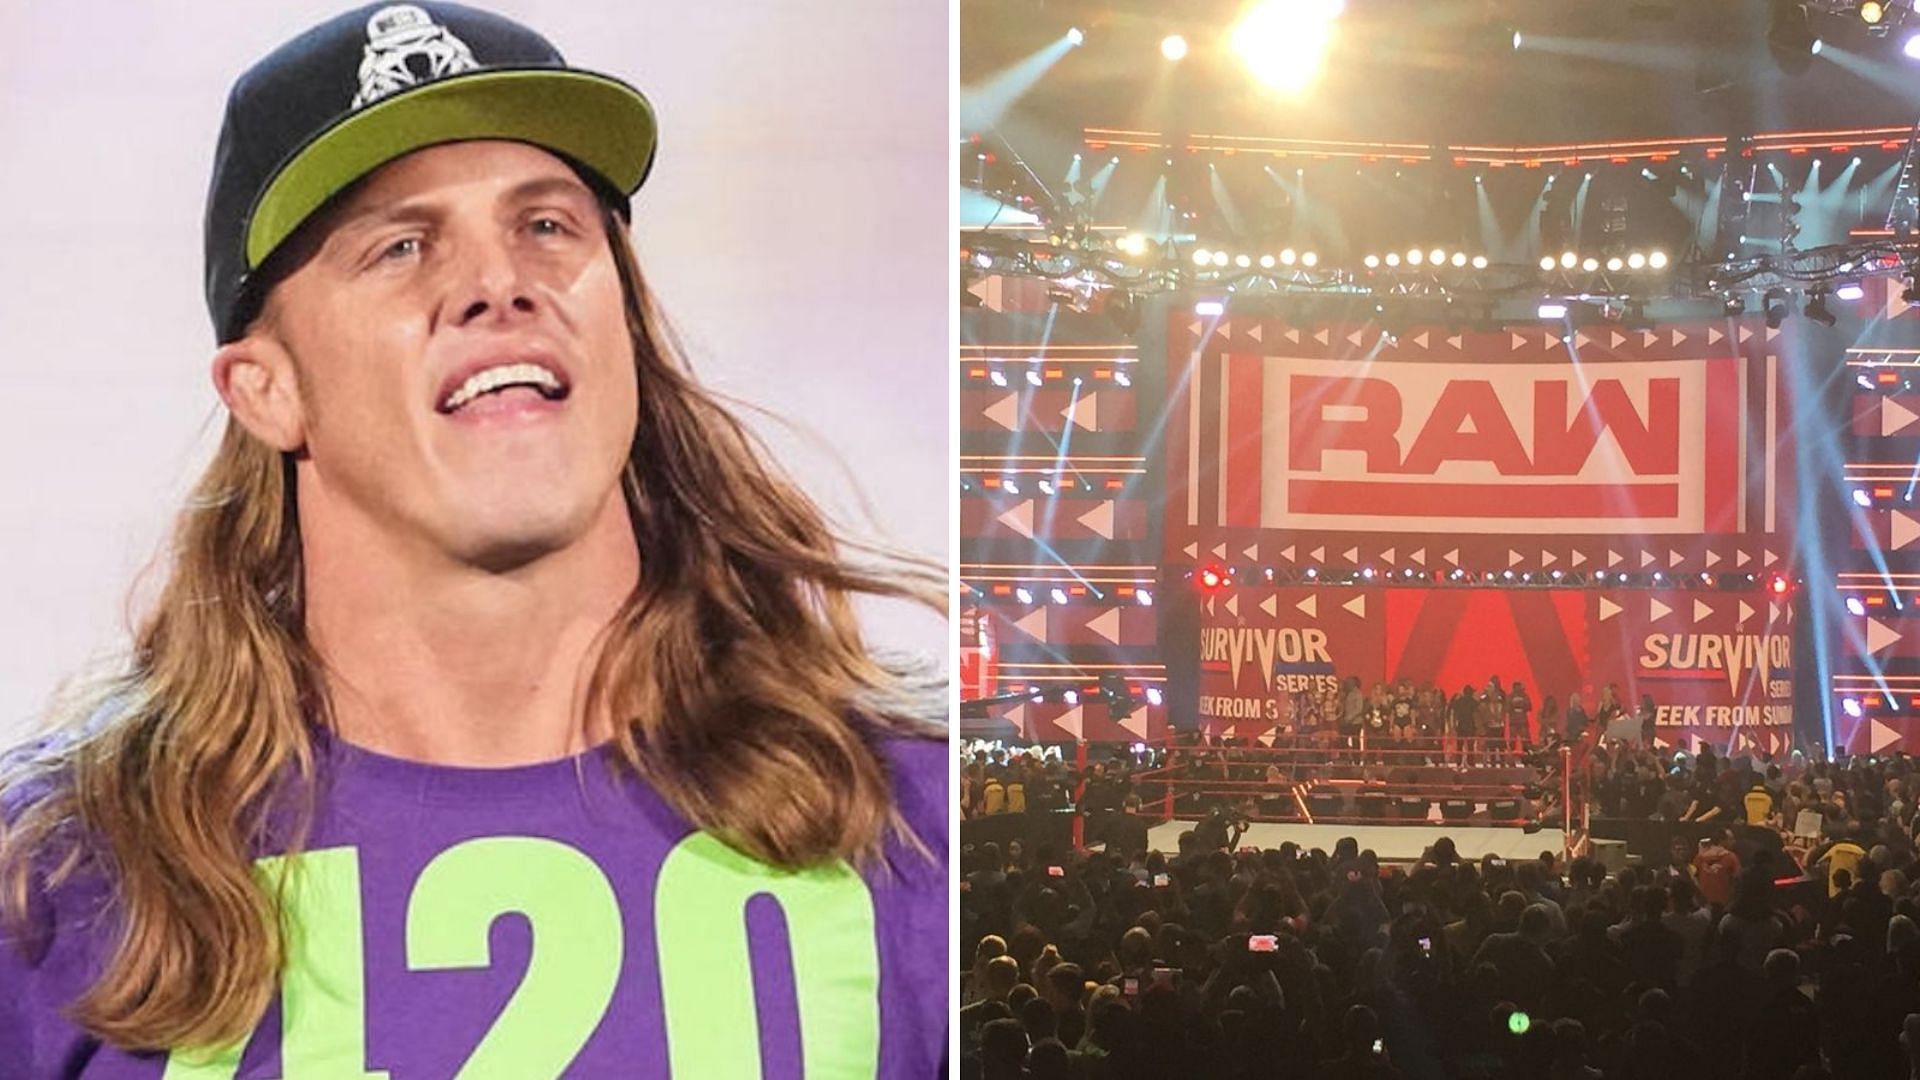 Matt Riddle has been a solo act since Randy Orton got injured earlier this year